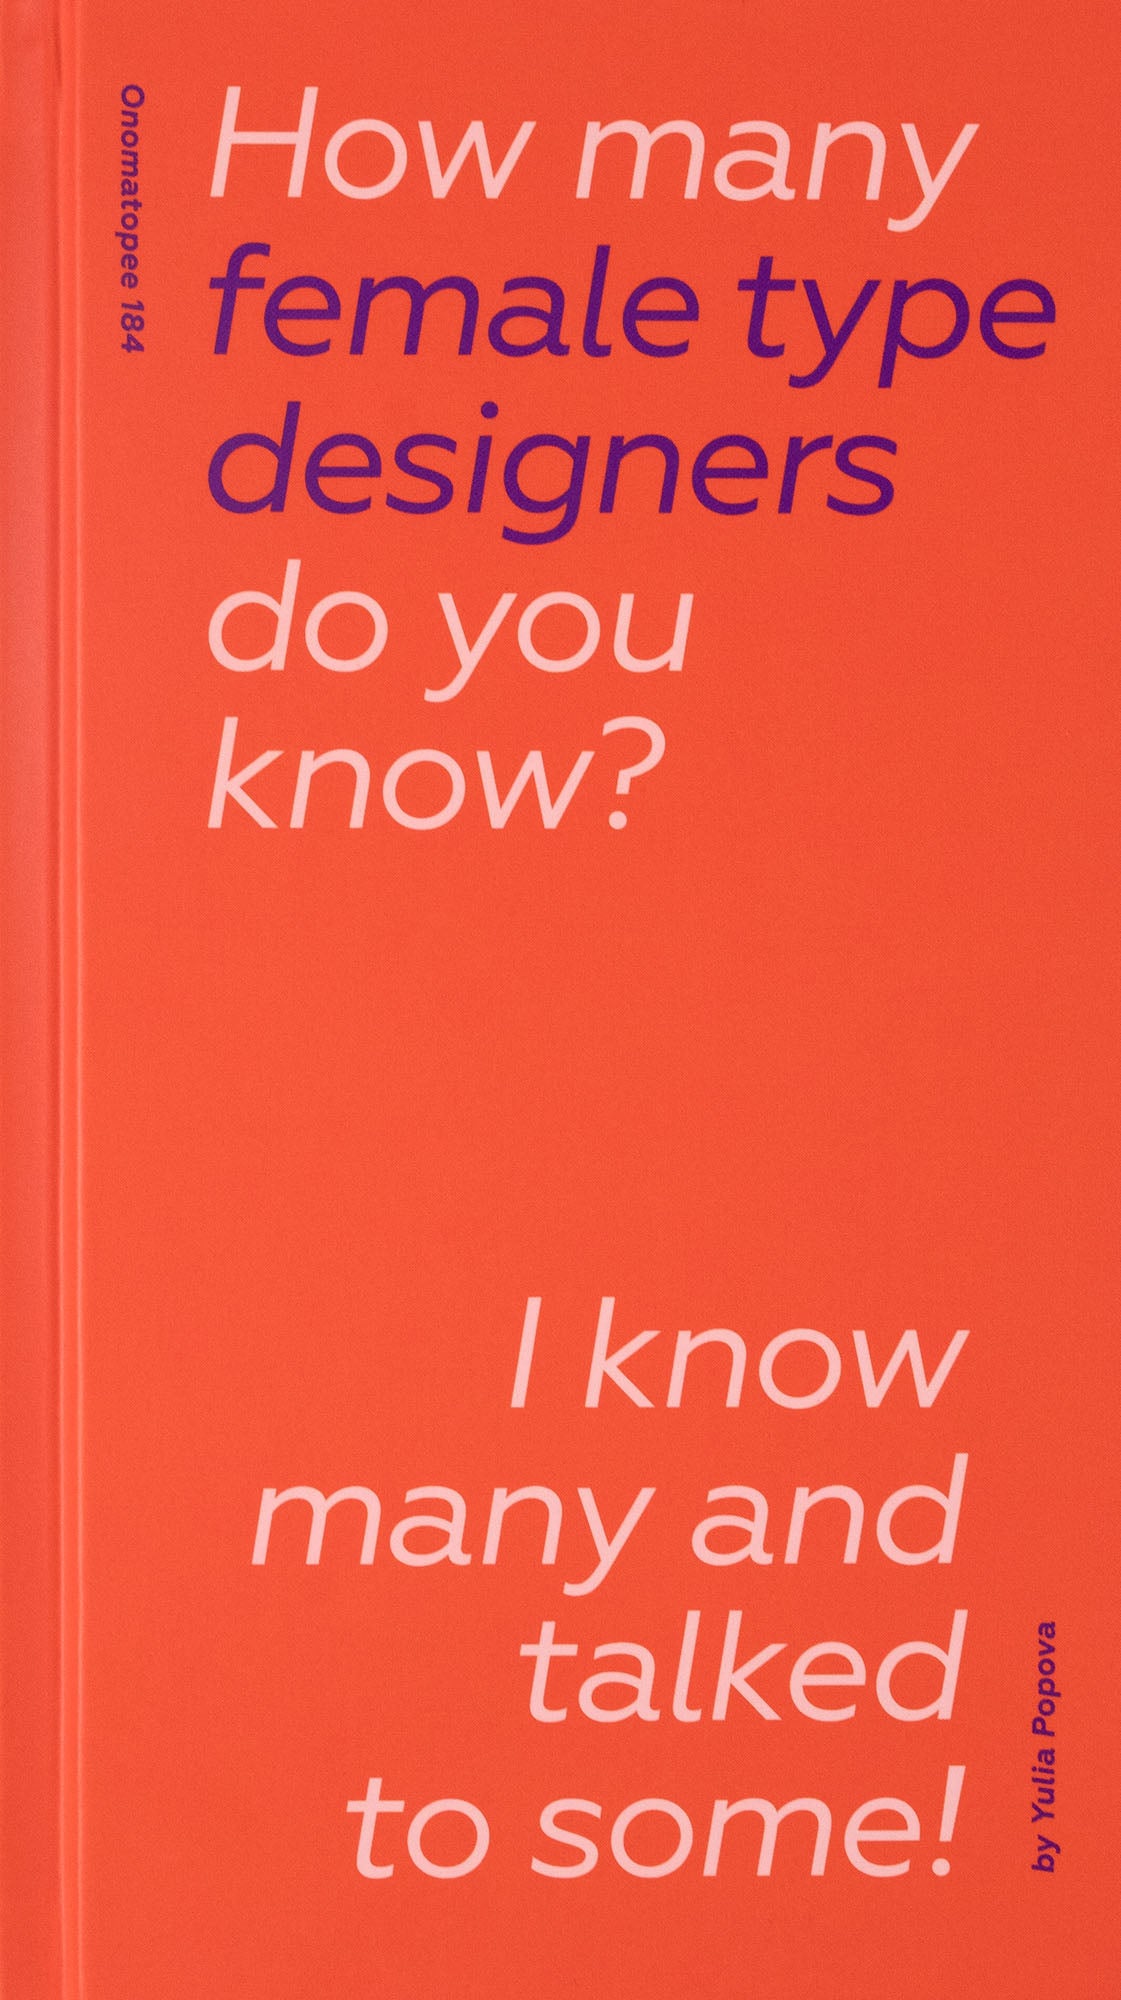 How many female type designers do you know? I know many and talked to some!